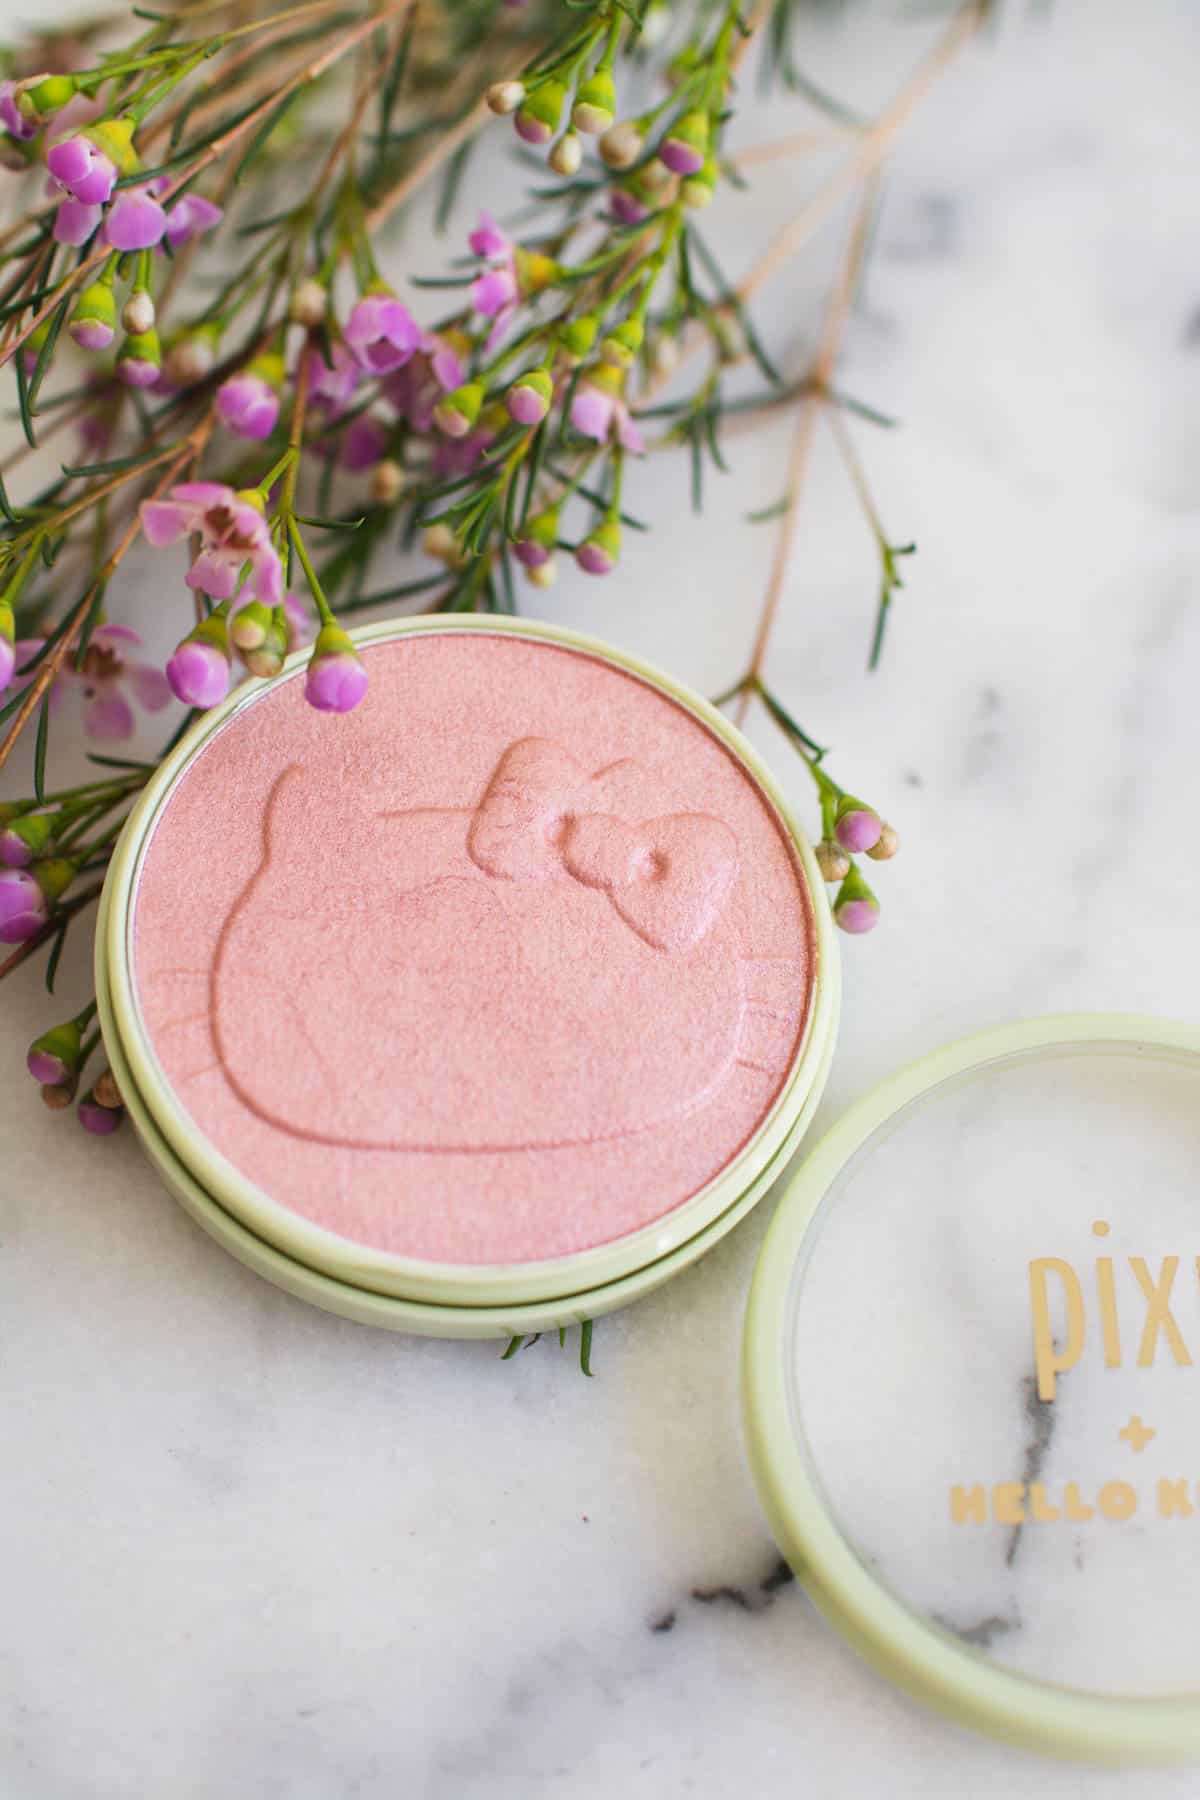 Hello Kitty imprinted blush from Pixi Beauty on a table next to some flowers.